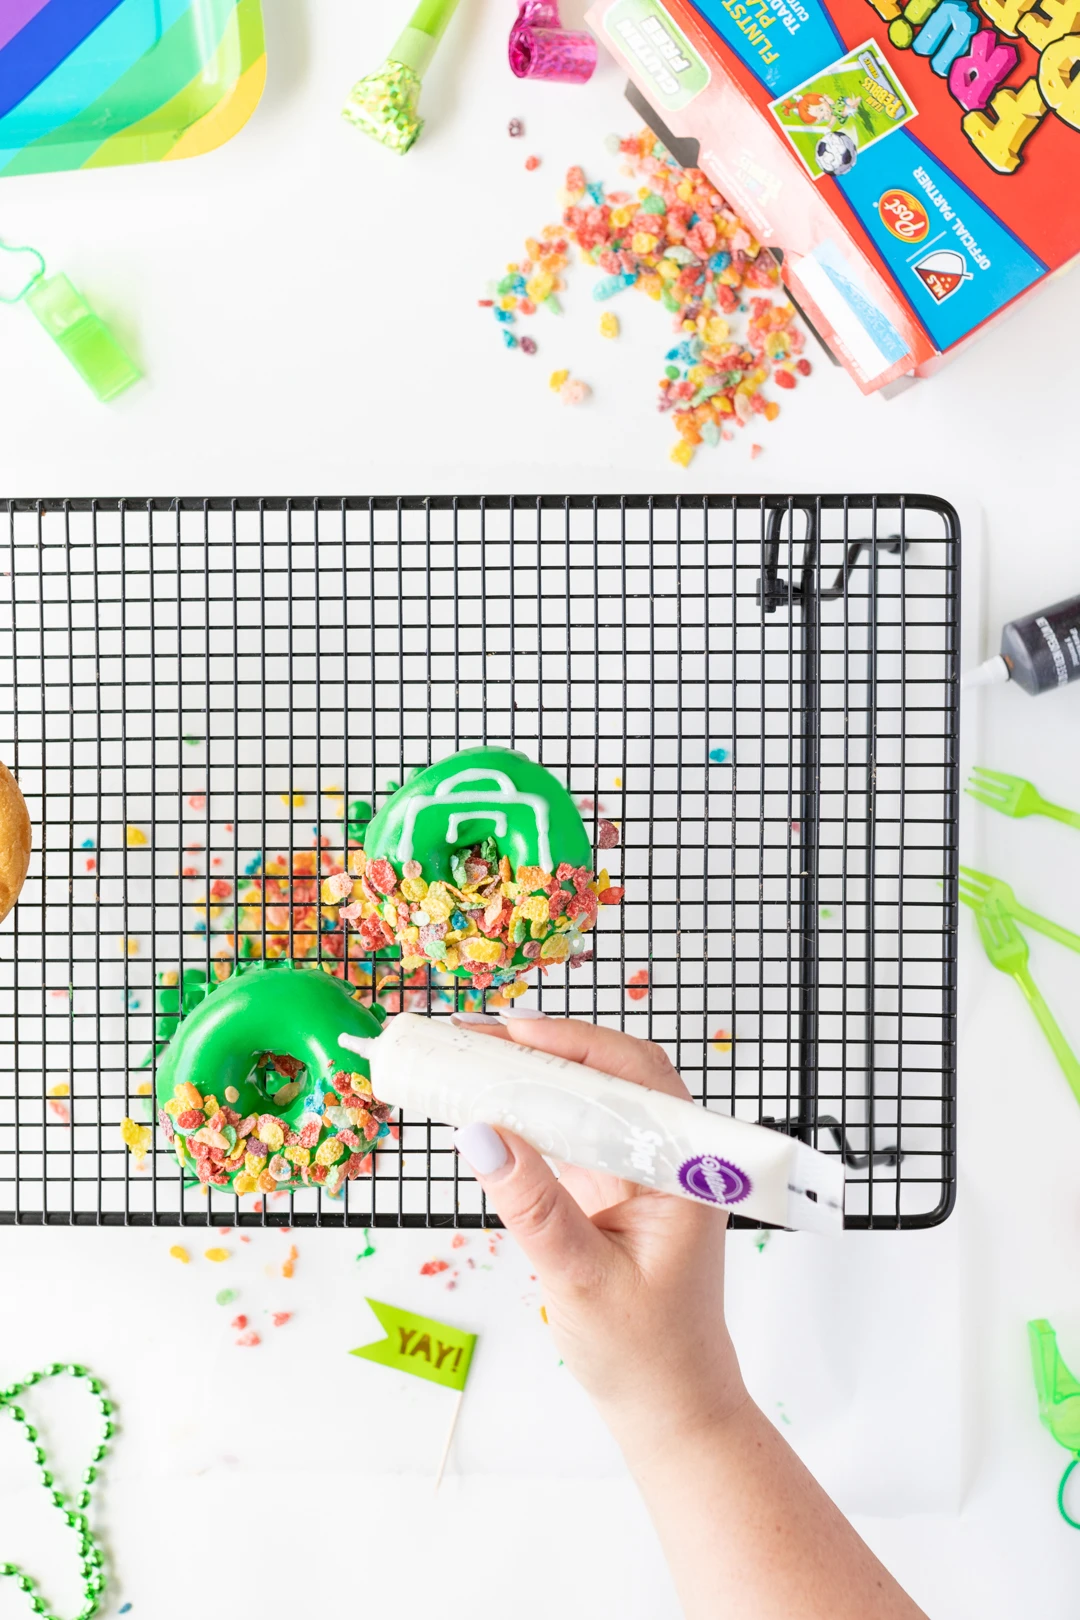 Decorating Donuts with colorful cereal and icing.